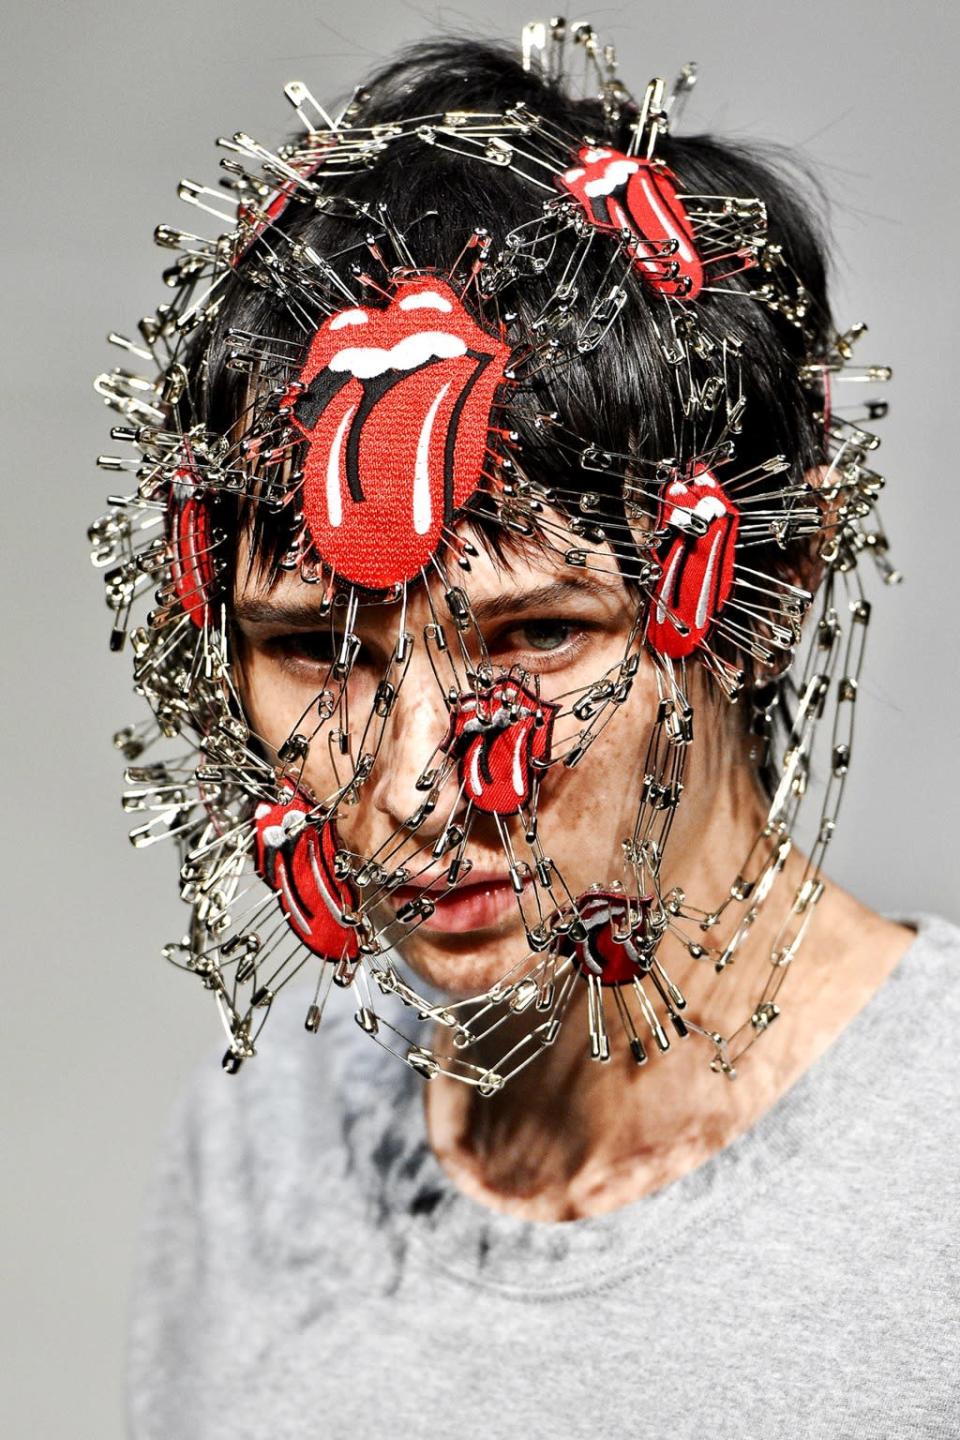 Safety pins and iron patches became a scary face mask at Plastictokyo’s show during Tokyo Fashion Week. 